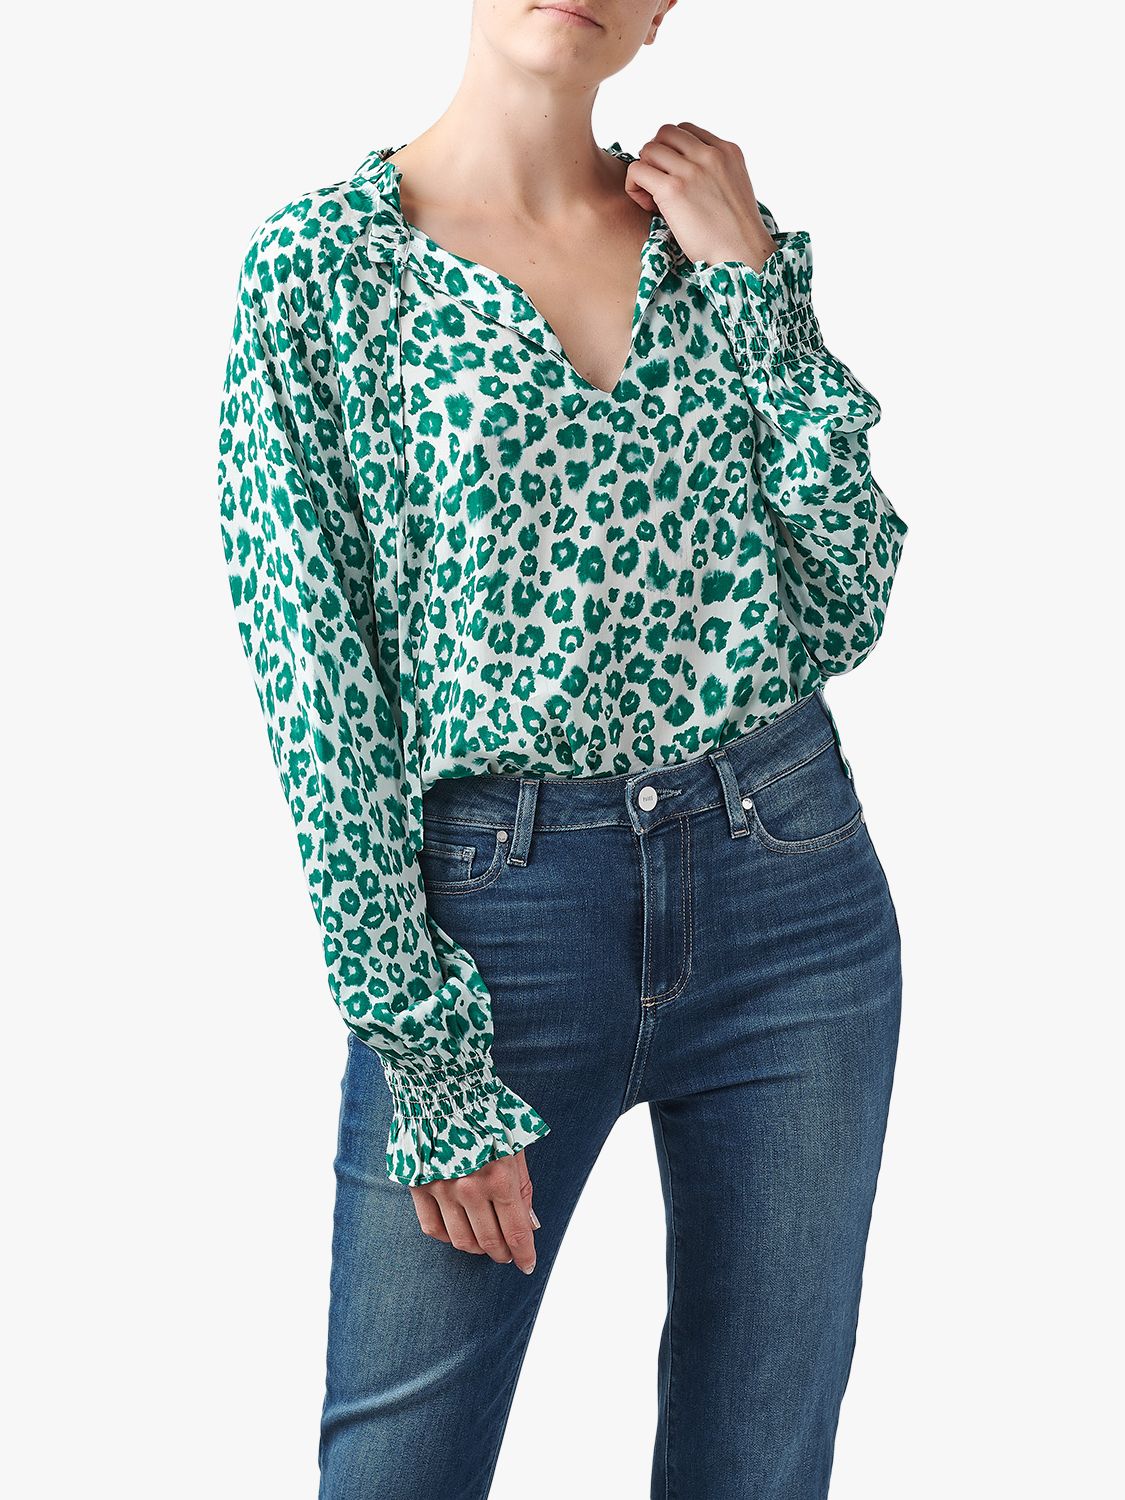 Lily and Lionel Florence Mini Leopard Print Blouse, Green, L